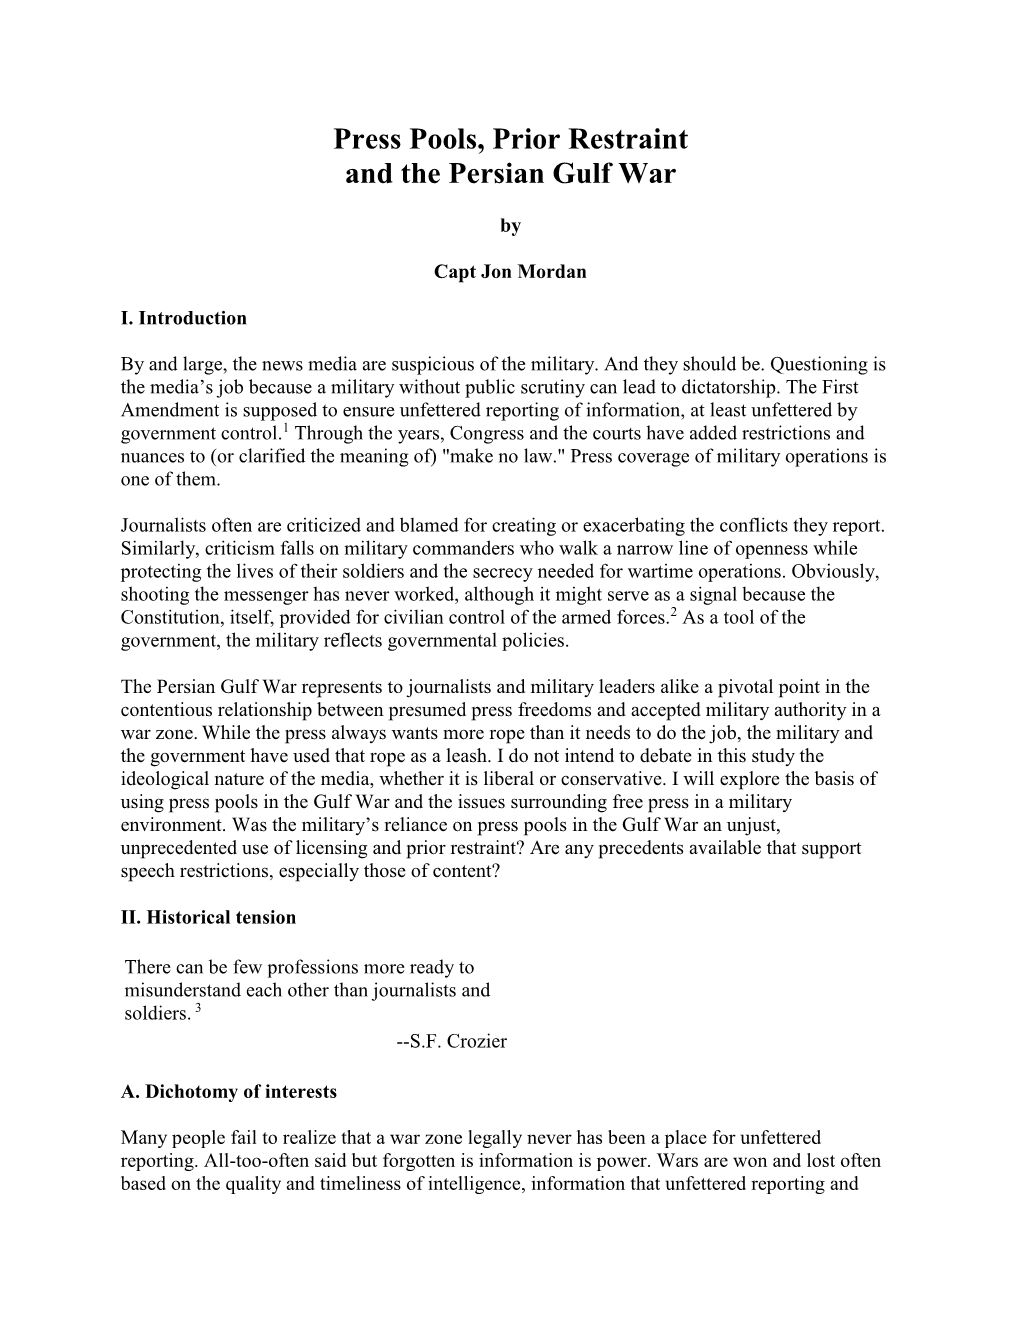 Press Pools, Prior Restraint and the Persian Gulf War